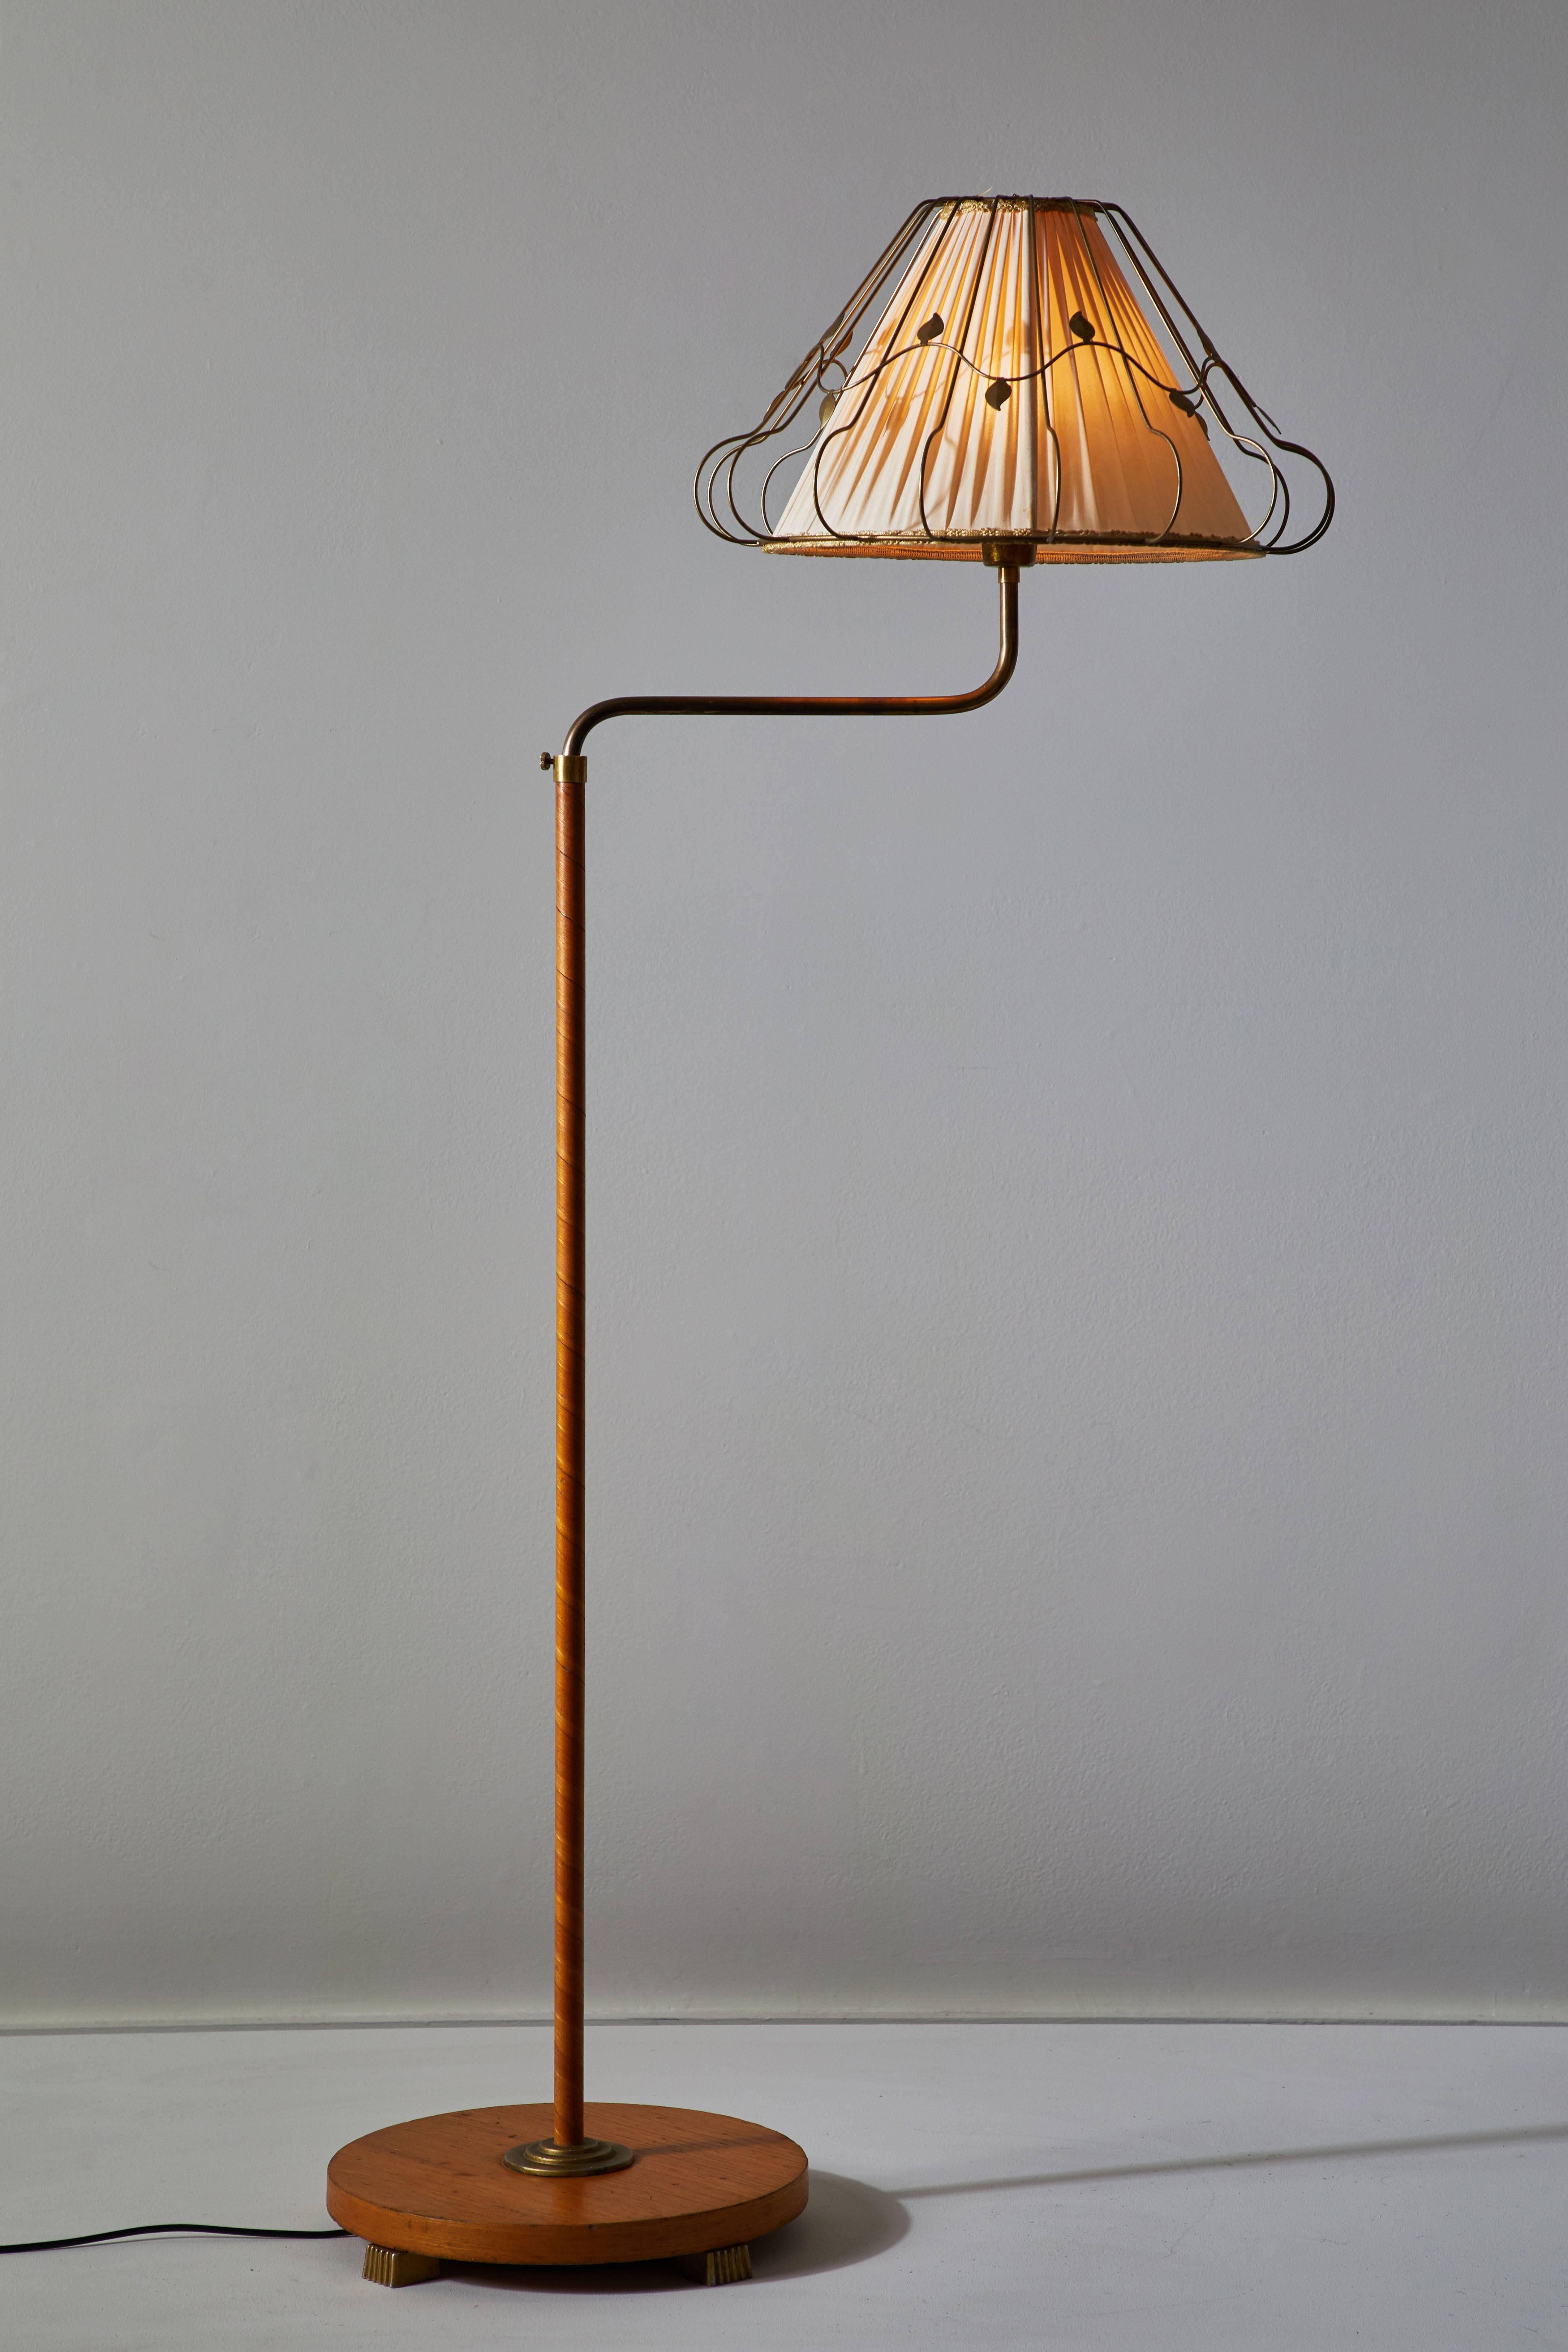 Rare Swedish floor lamp manufactured in Sweden, circa 1920s. Original cast iron legs on wooden base. Original silk shade with brass filigree. Original wood wrapped handle stem with brass handle that rotates left/right . Takes one E27 60w maximum